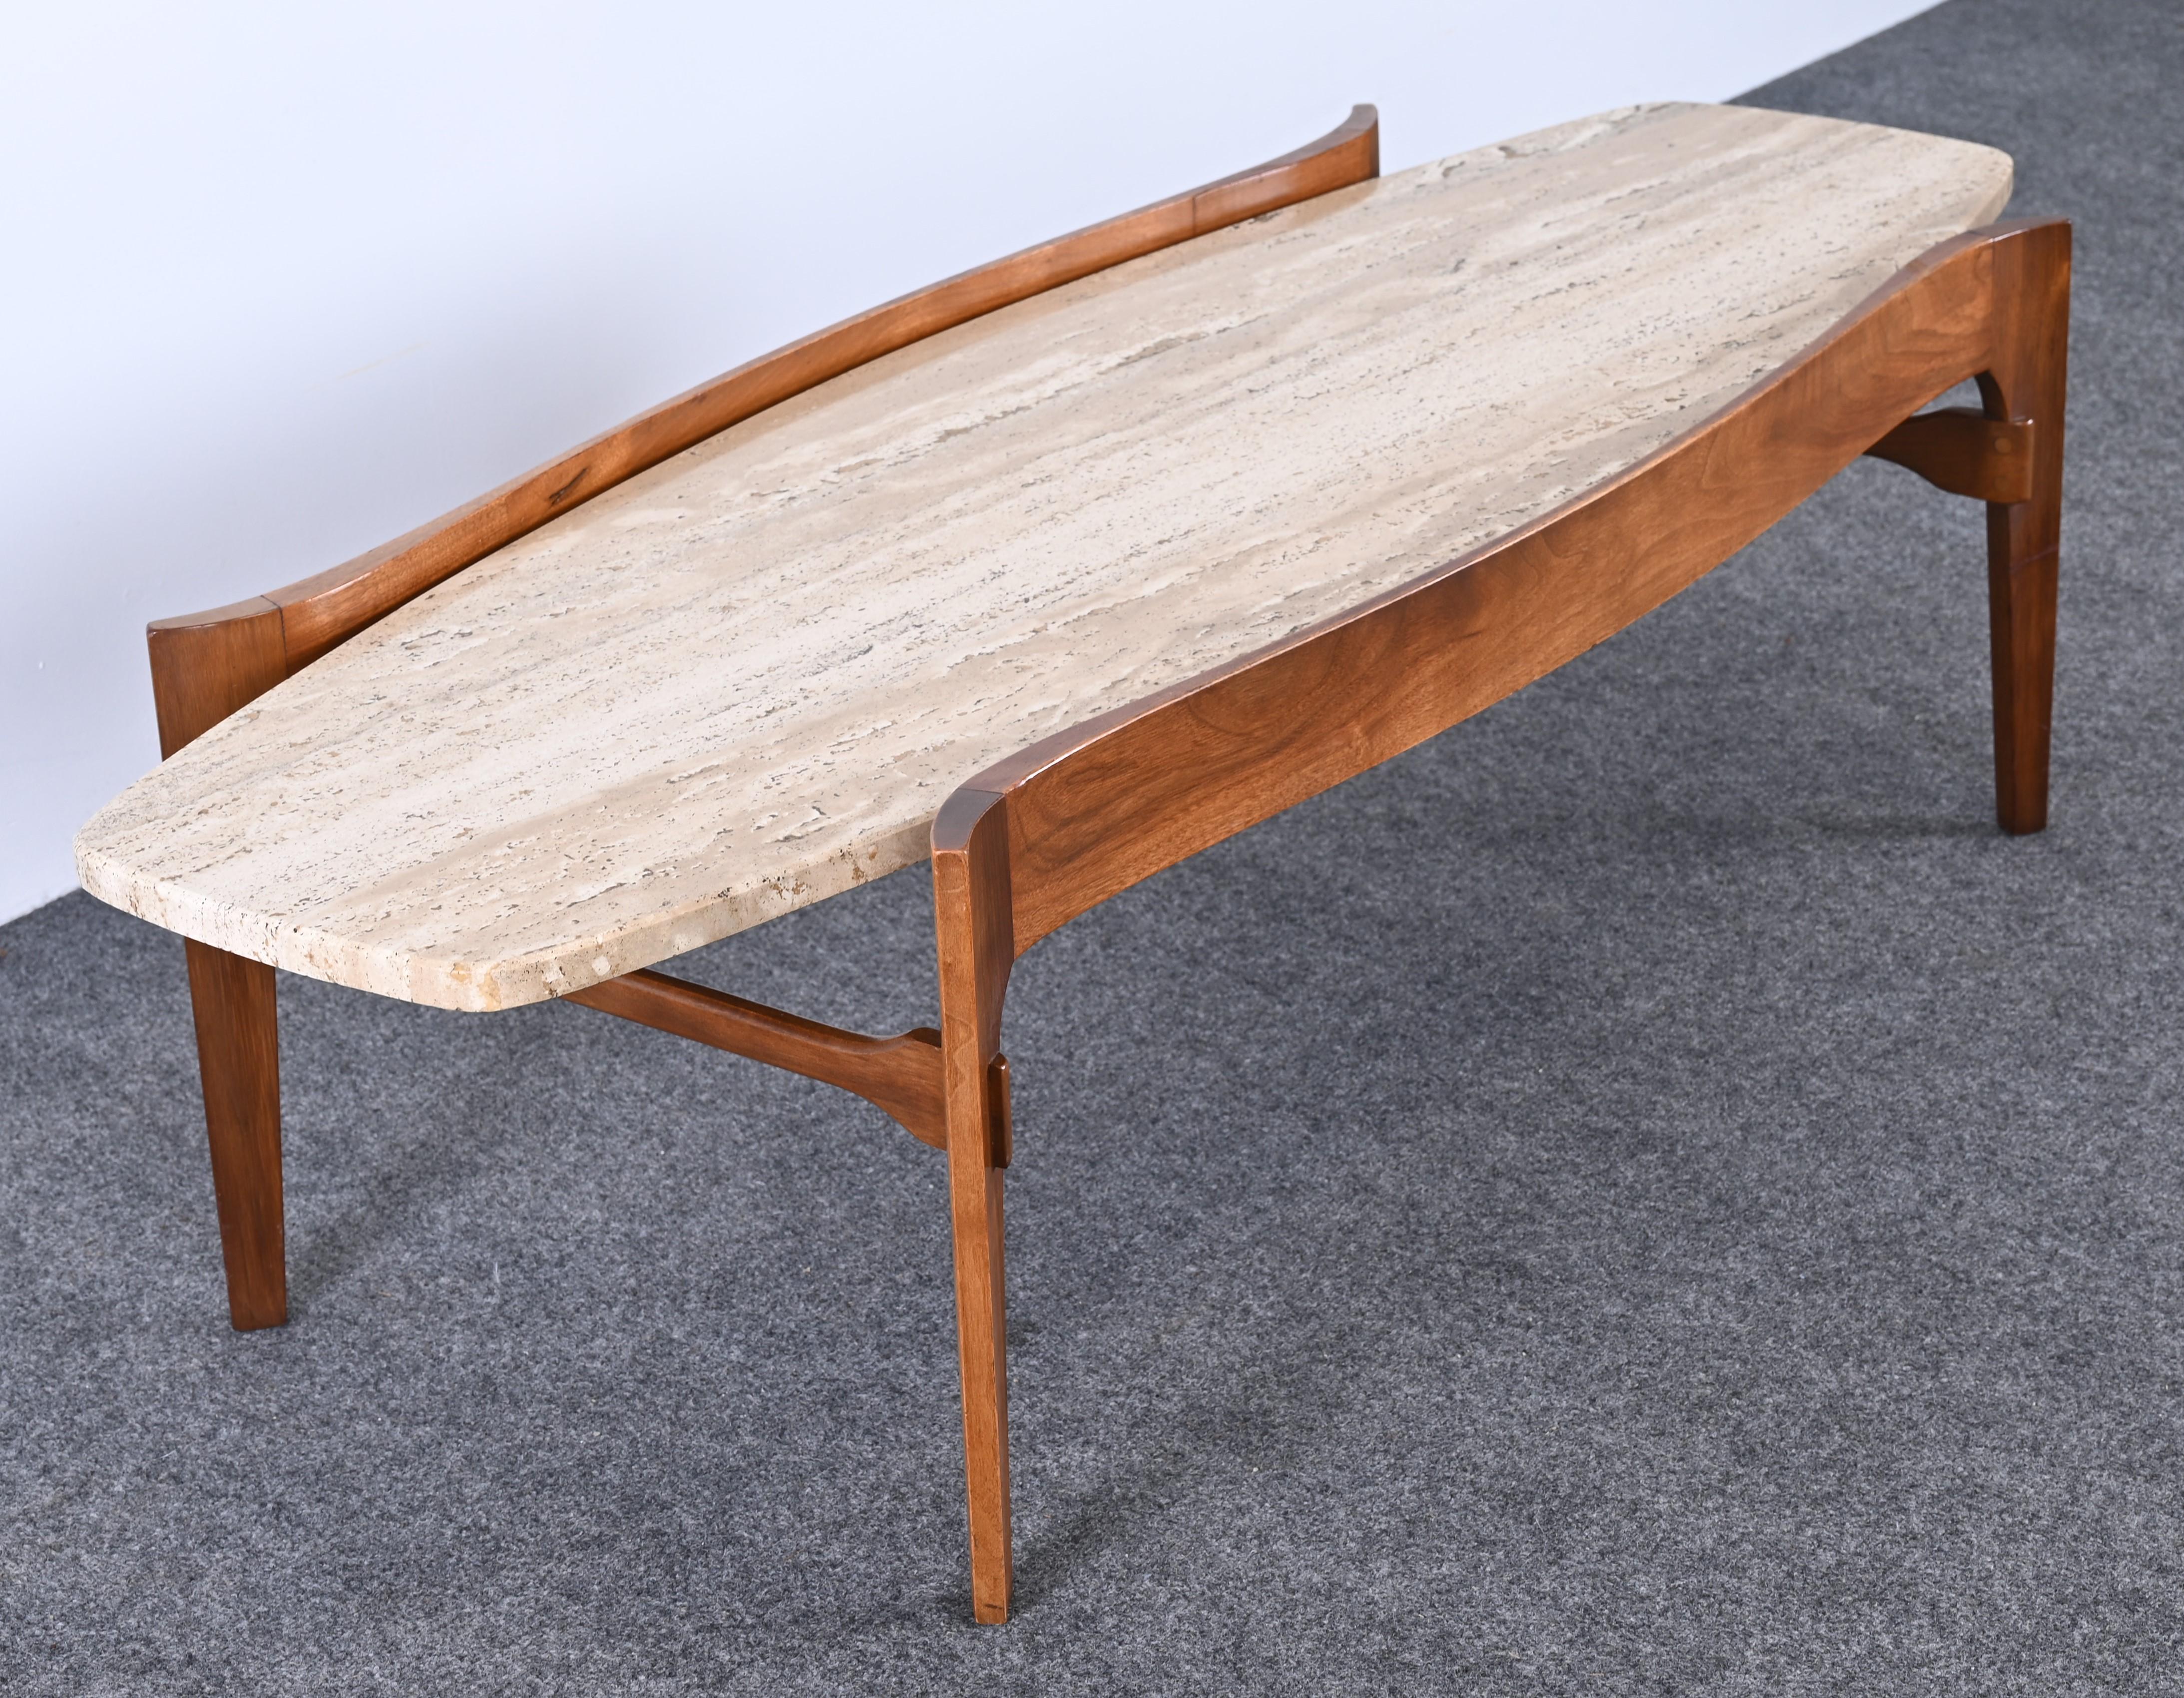 A sculptural Mid-Century Modern walnut and travertine coffee table by Bertha Schaefer for M. Singer & Sons. This beautiful travertine cocktail table would look great in any interior. The coffee table is structurally sound with age-appropriate wear.